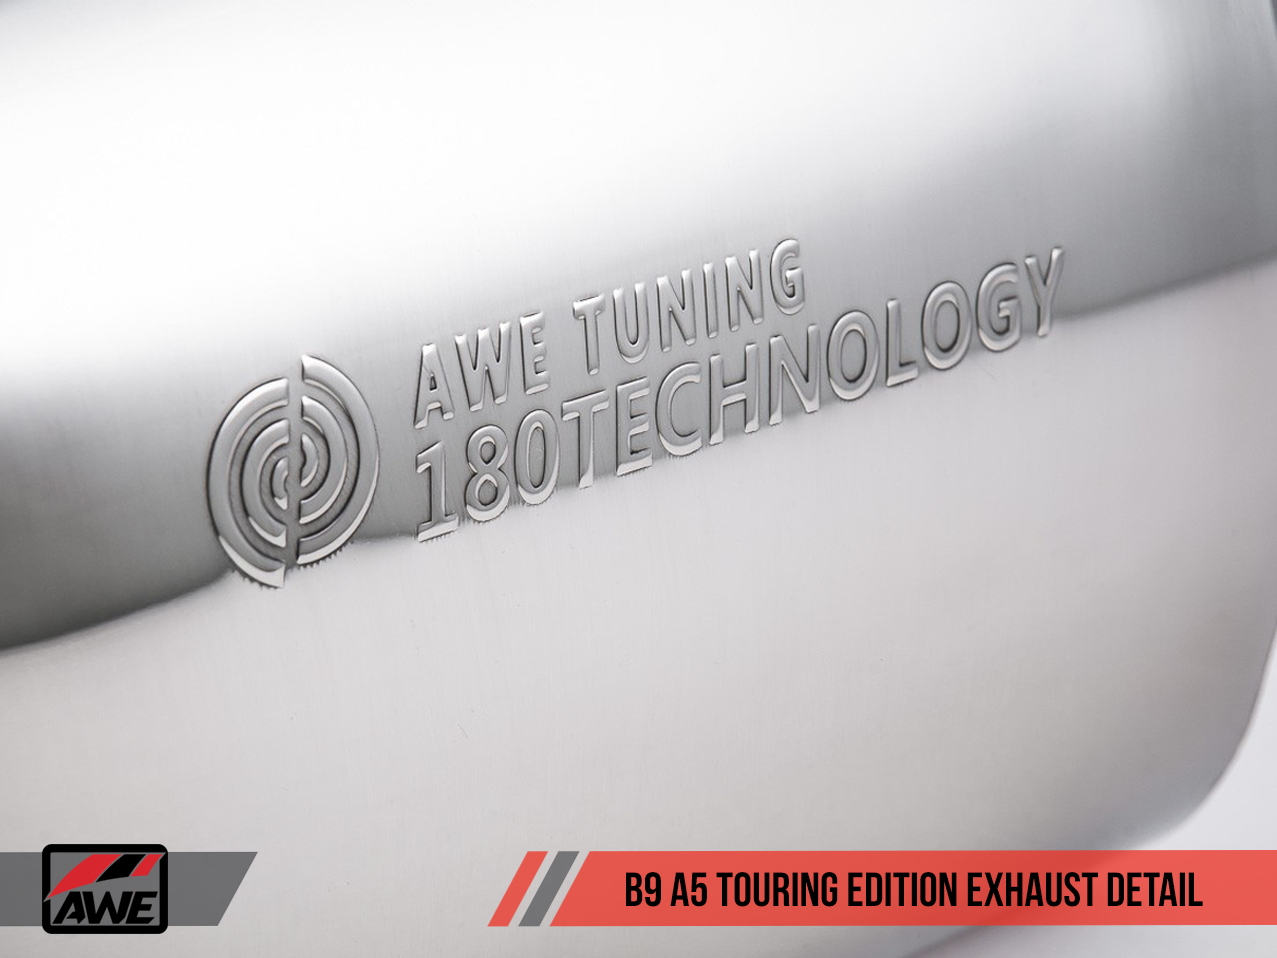 AWE Touring Edition Exhaust for B9 A5, Dual Outlet - Chrome Silver Tips (includes DP)